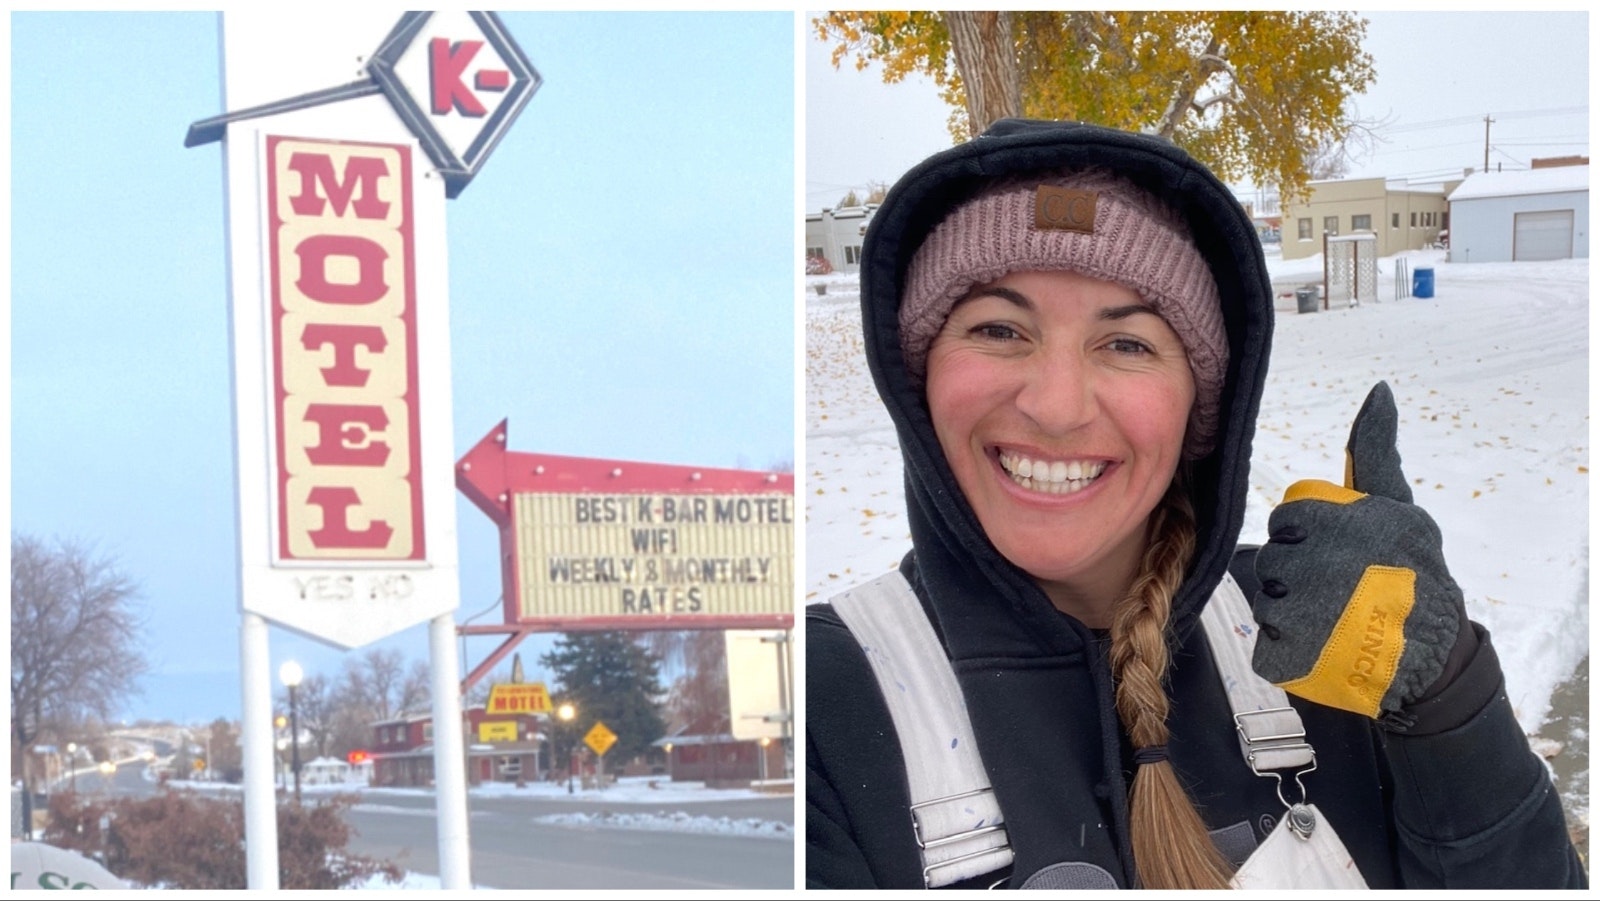 Even a polar vortex dropping temperatures to minus 30 degrees and colder can't slow Amanda McGrew and the renovation of her Best K-Bar Motel in Greybull.